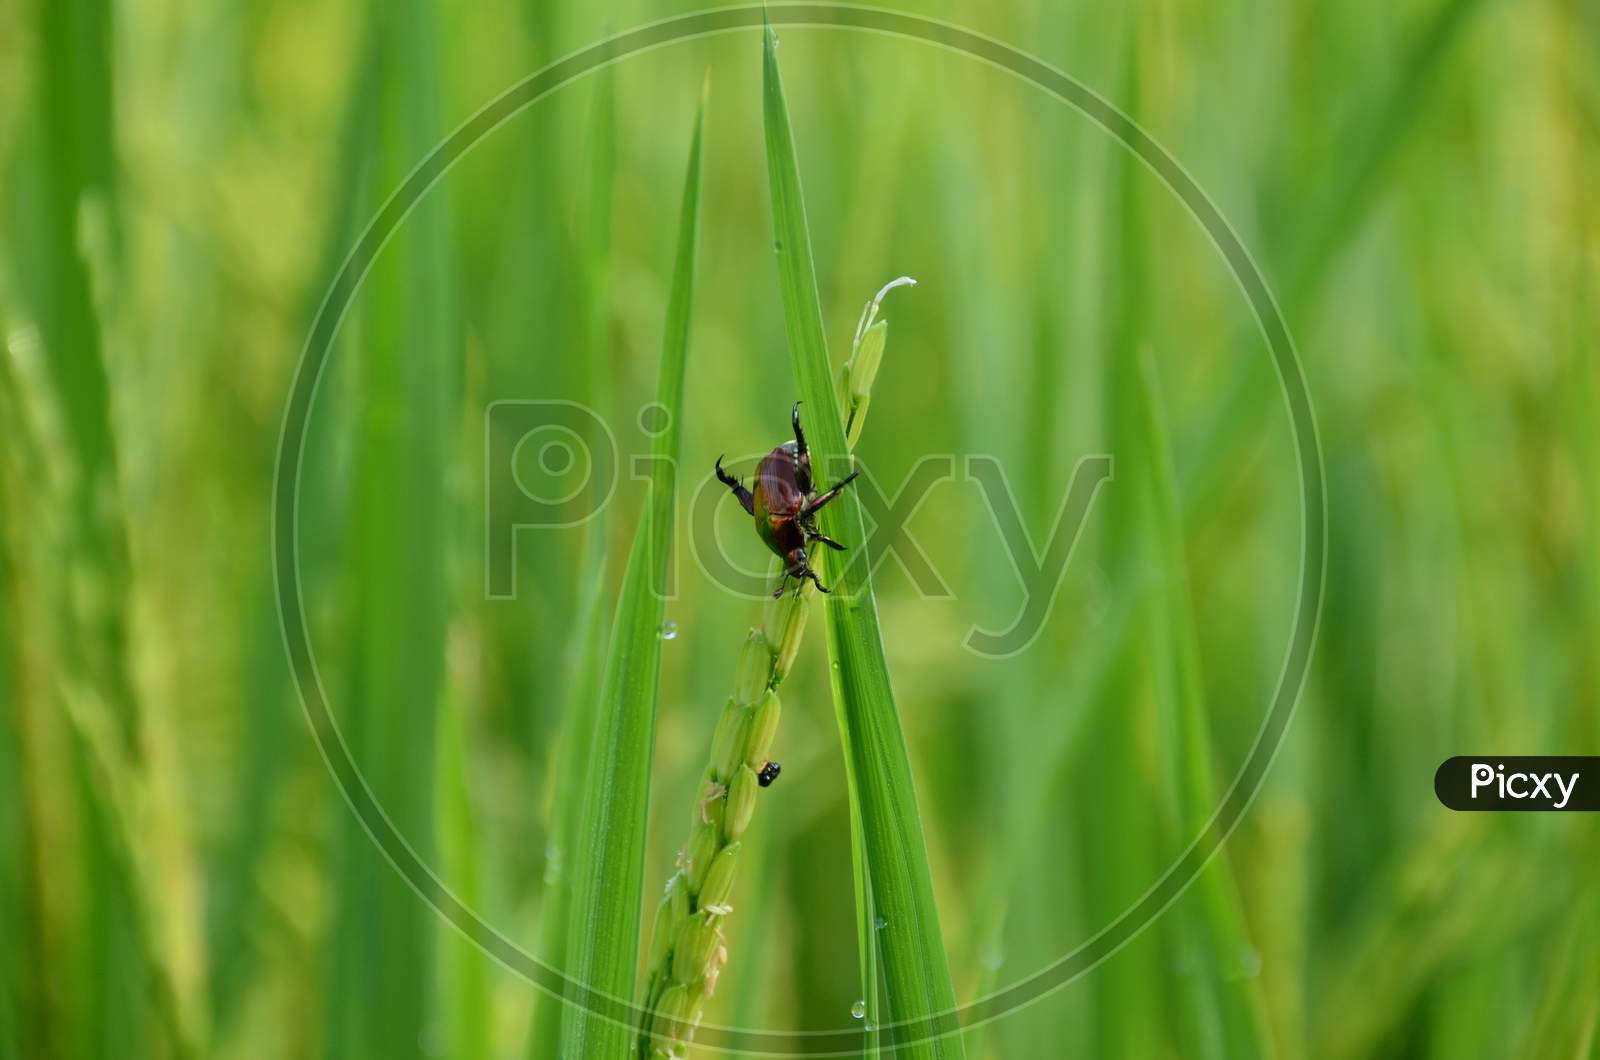 The Small Orange Color Weevil Insect Hold On Paddy Plant Leaves.